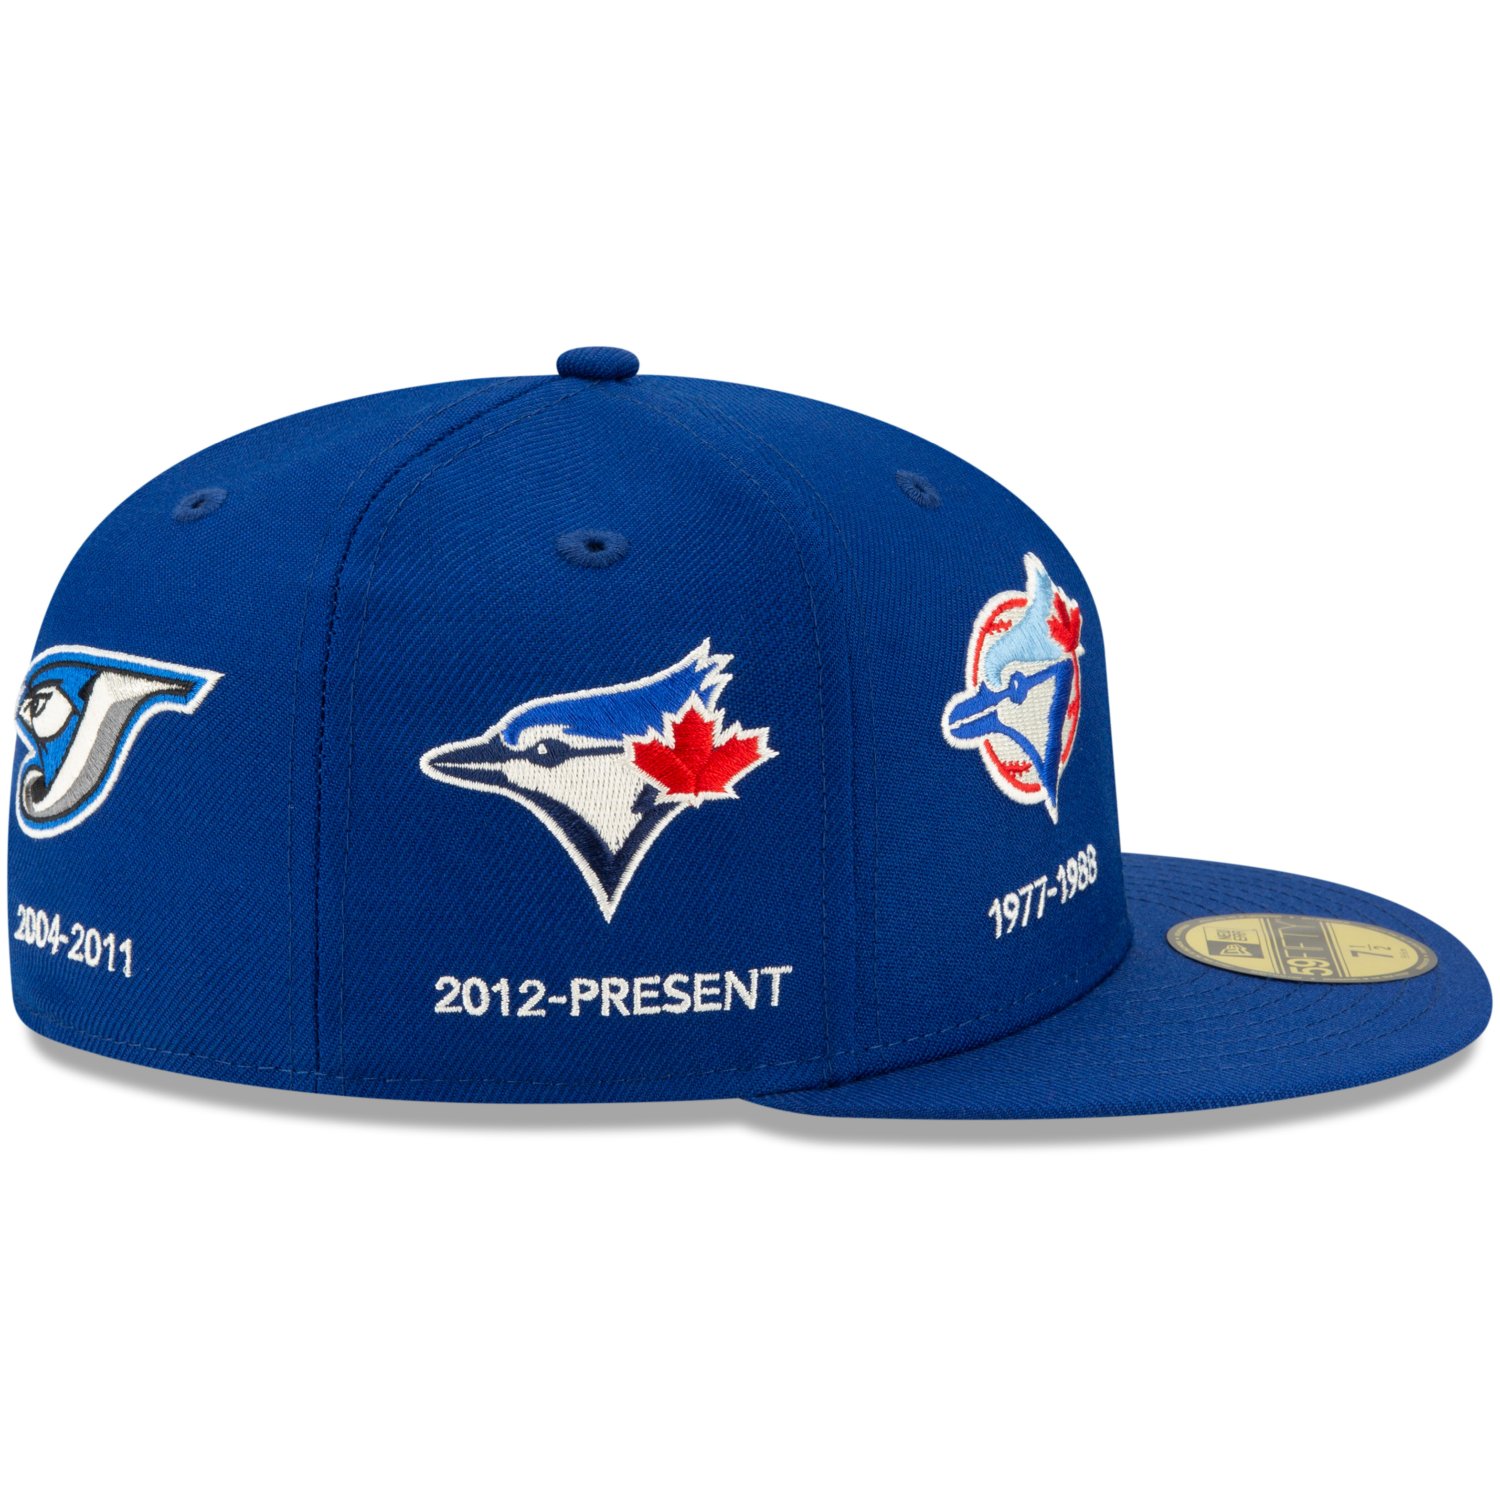 New Era 59Fifty Fitted Cap - COOPERSTOWN Toronto Blue Jays, Fitted, Caps